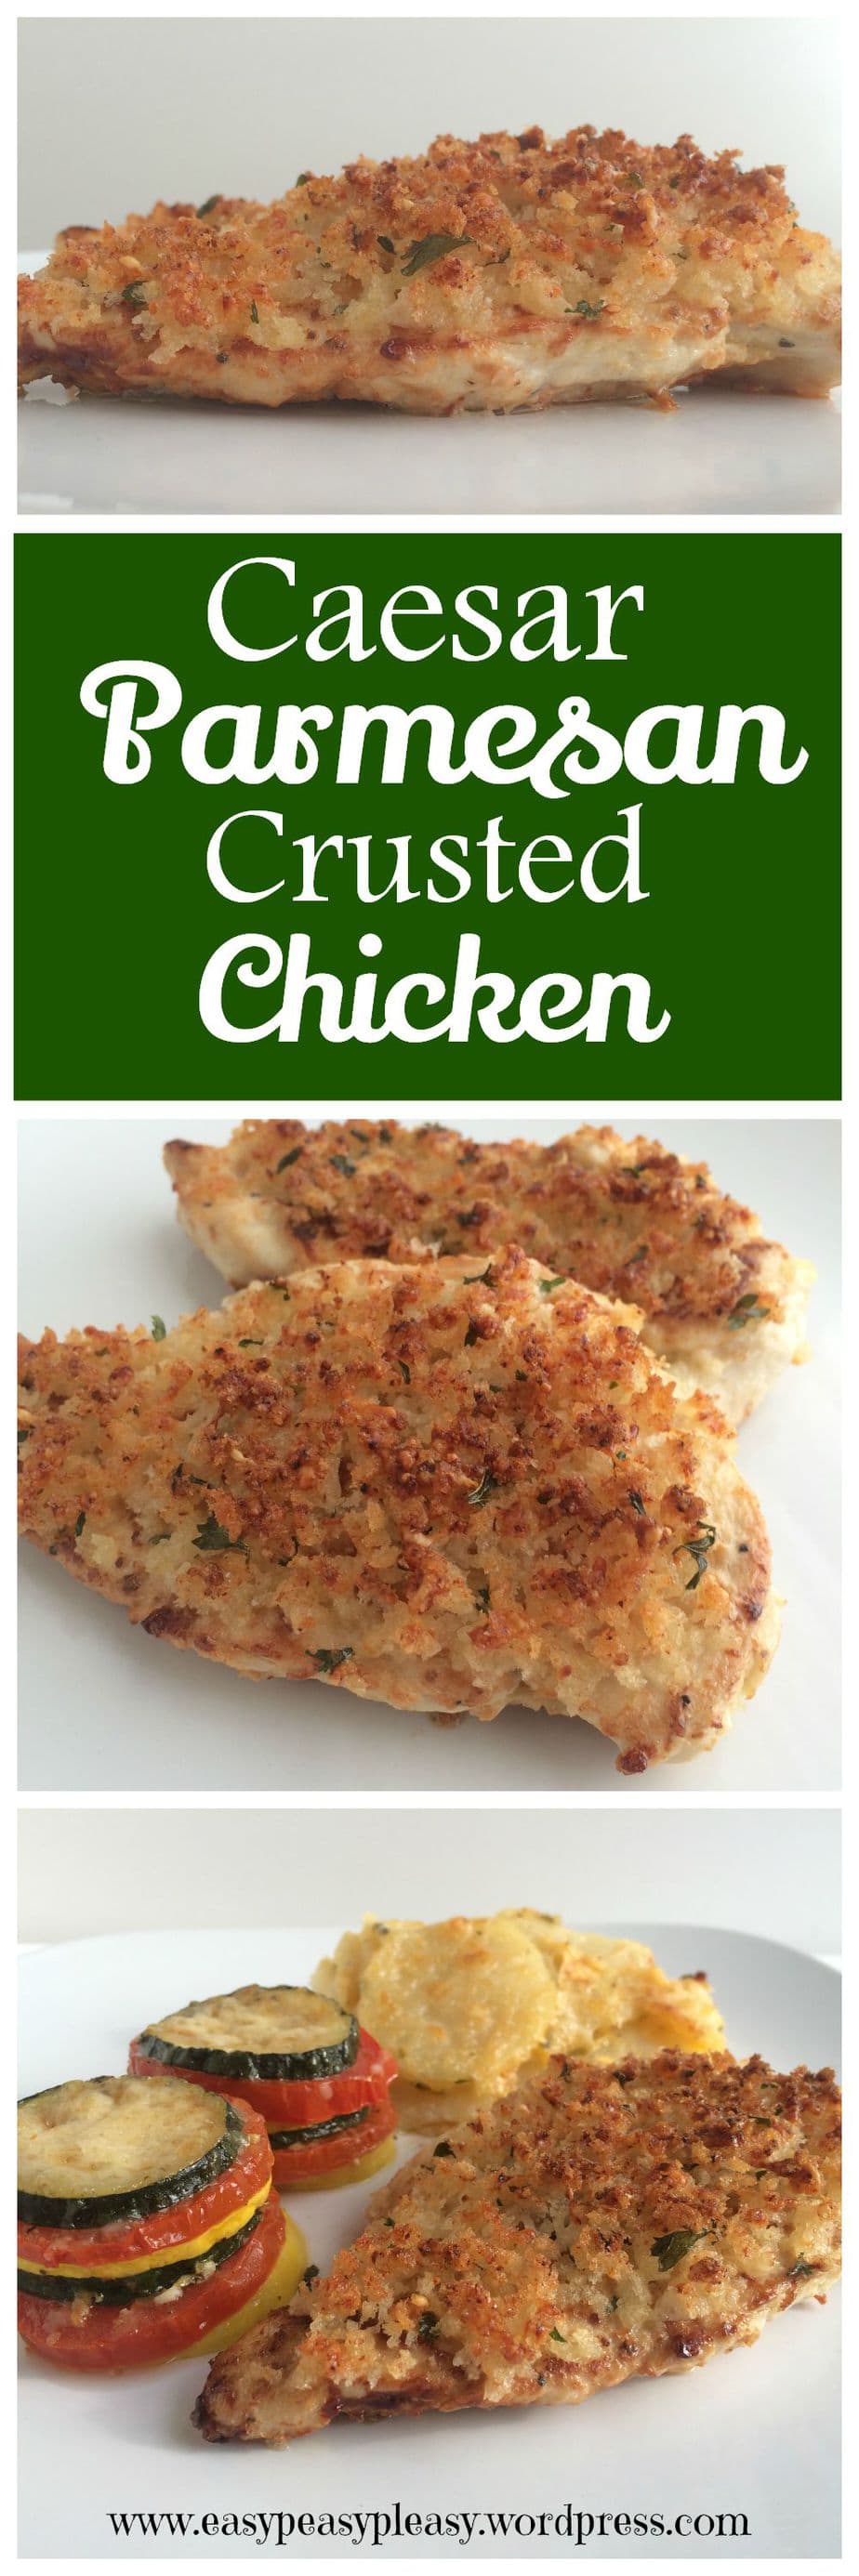 Caesar Parmesan Crusted Chicken is an easy dish for those busy weeknights.